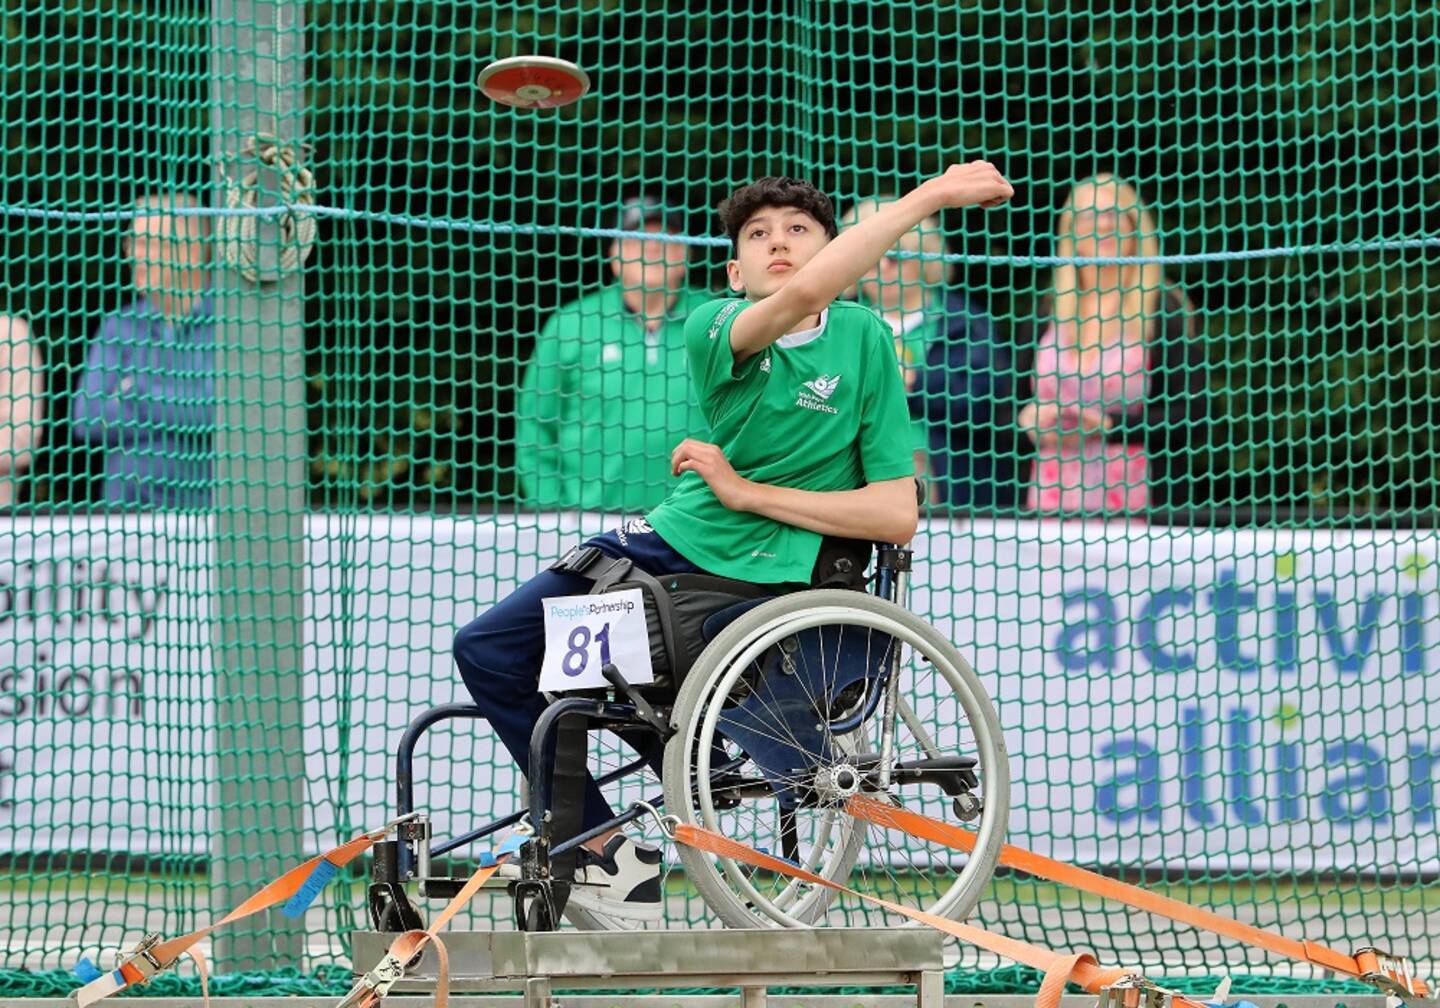 Junior athlete taking part in seated discus throw at Activity Alliance's Athletics Championships event.